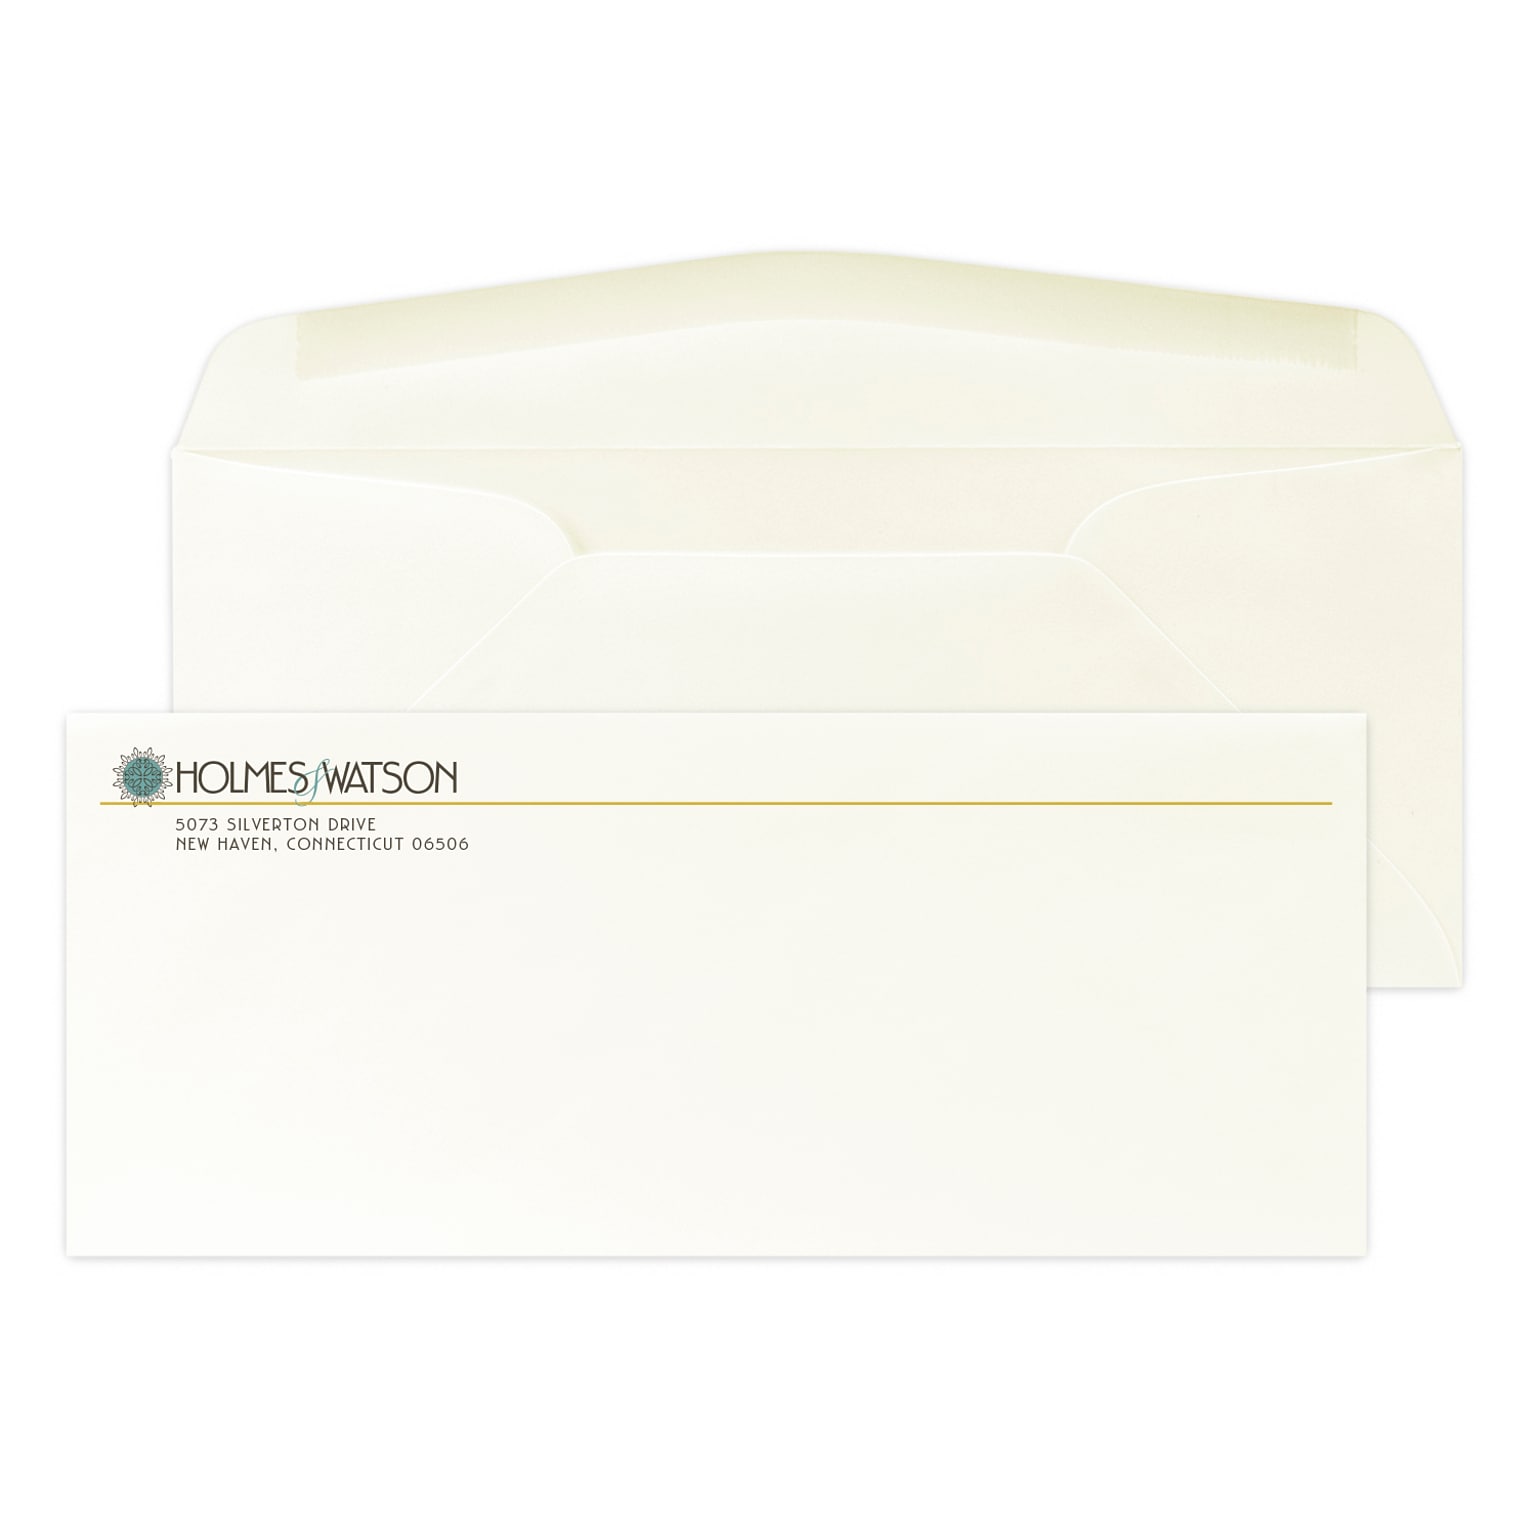 Custom Full Color #10 Stationery Envelopes, 4 1/4 x 9 1/2, 80# CLASSIC® CREST Natural White Text, Flat Ink, 250 / Pack